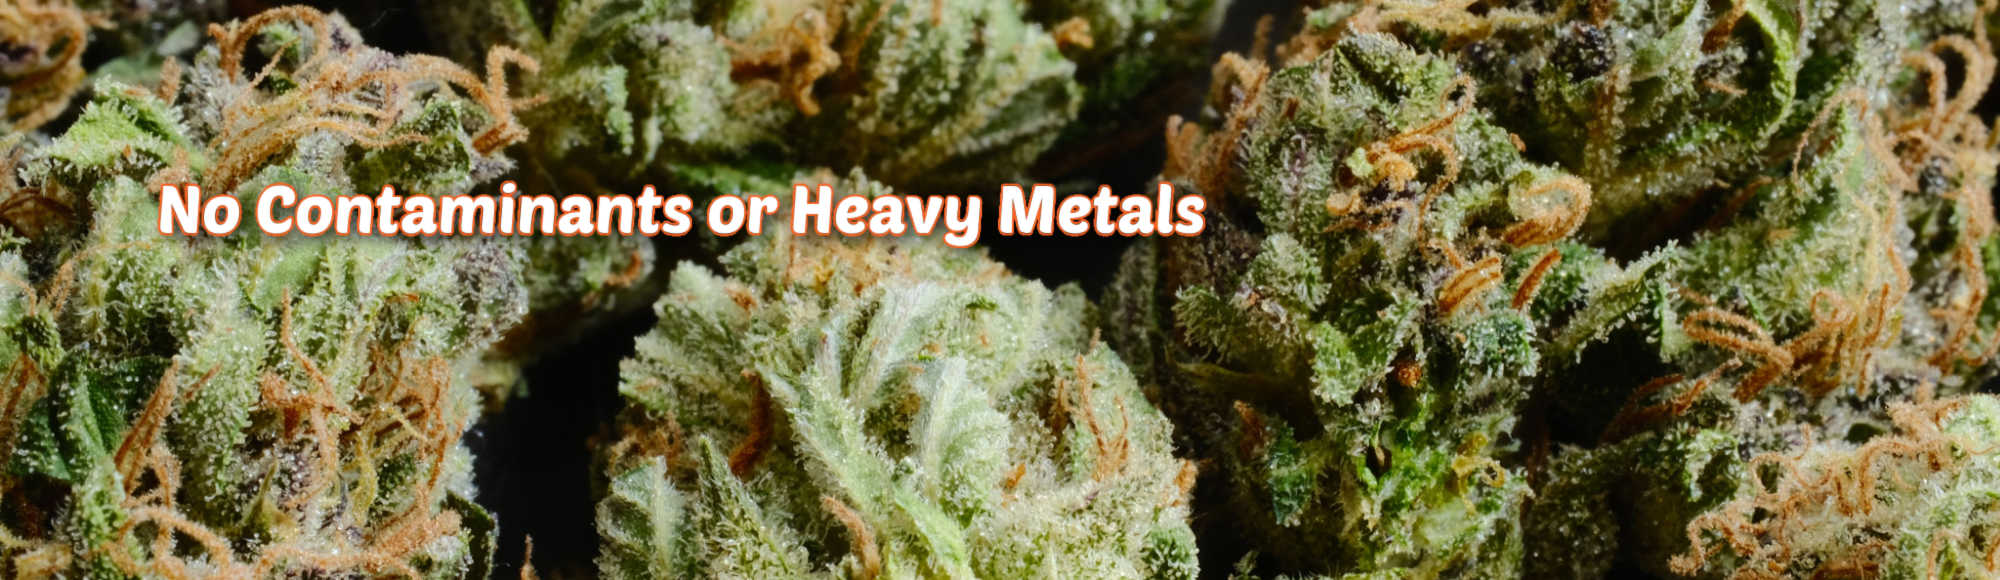 image of no contaminations or heavy metals in hydrophobic hemp flower